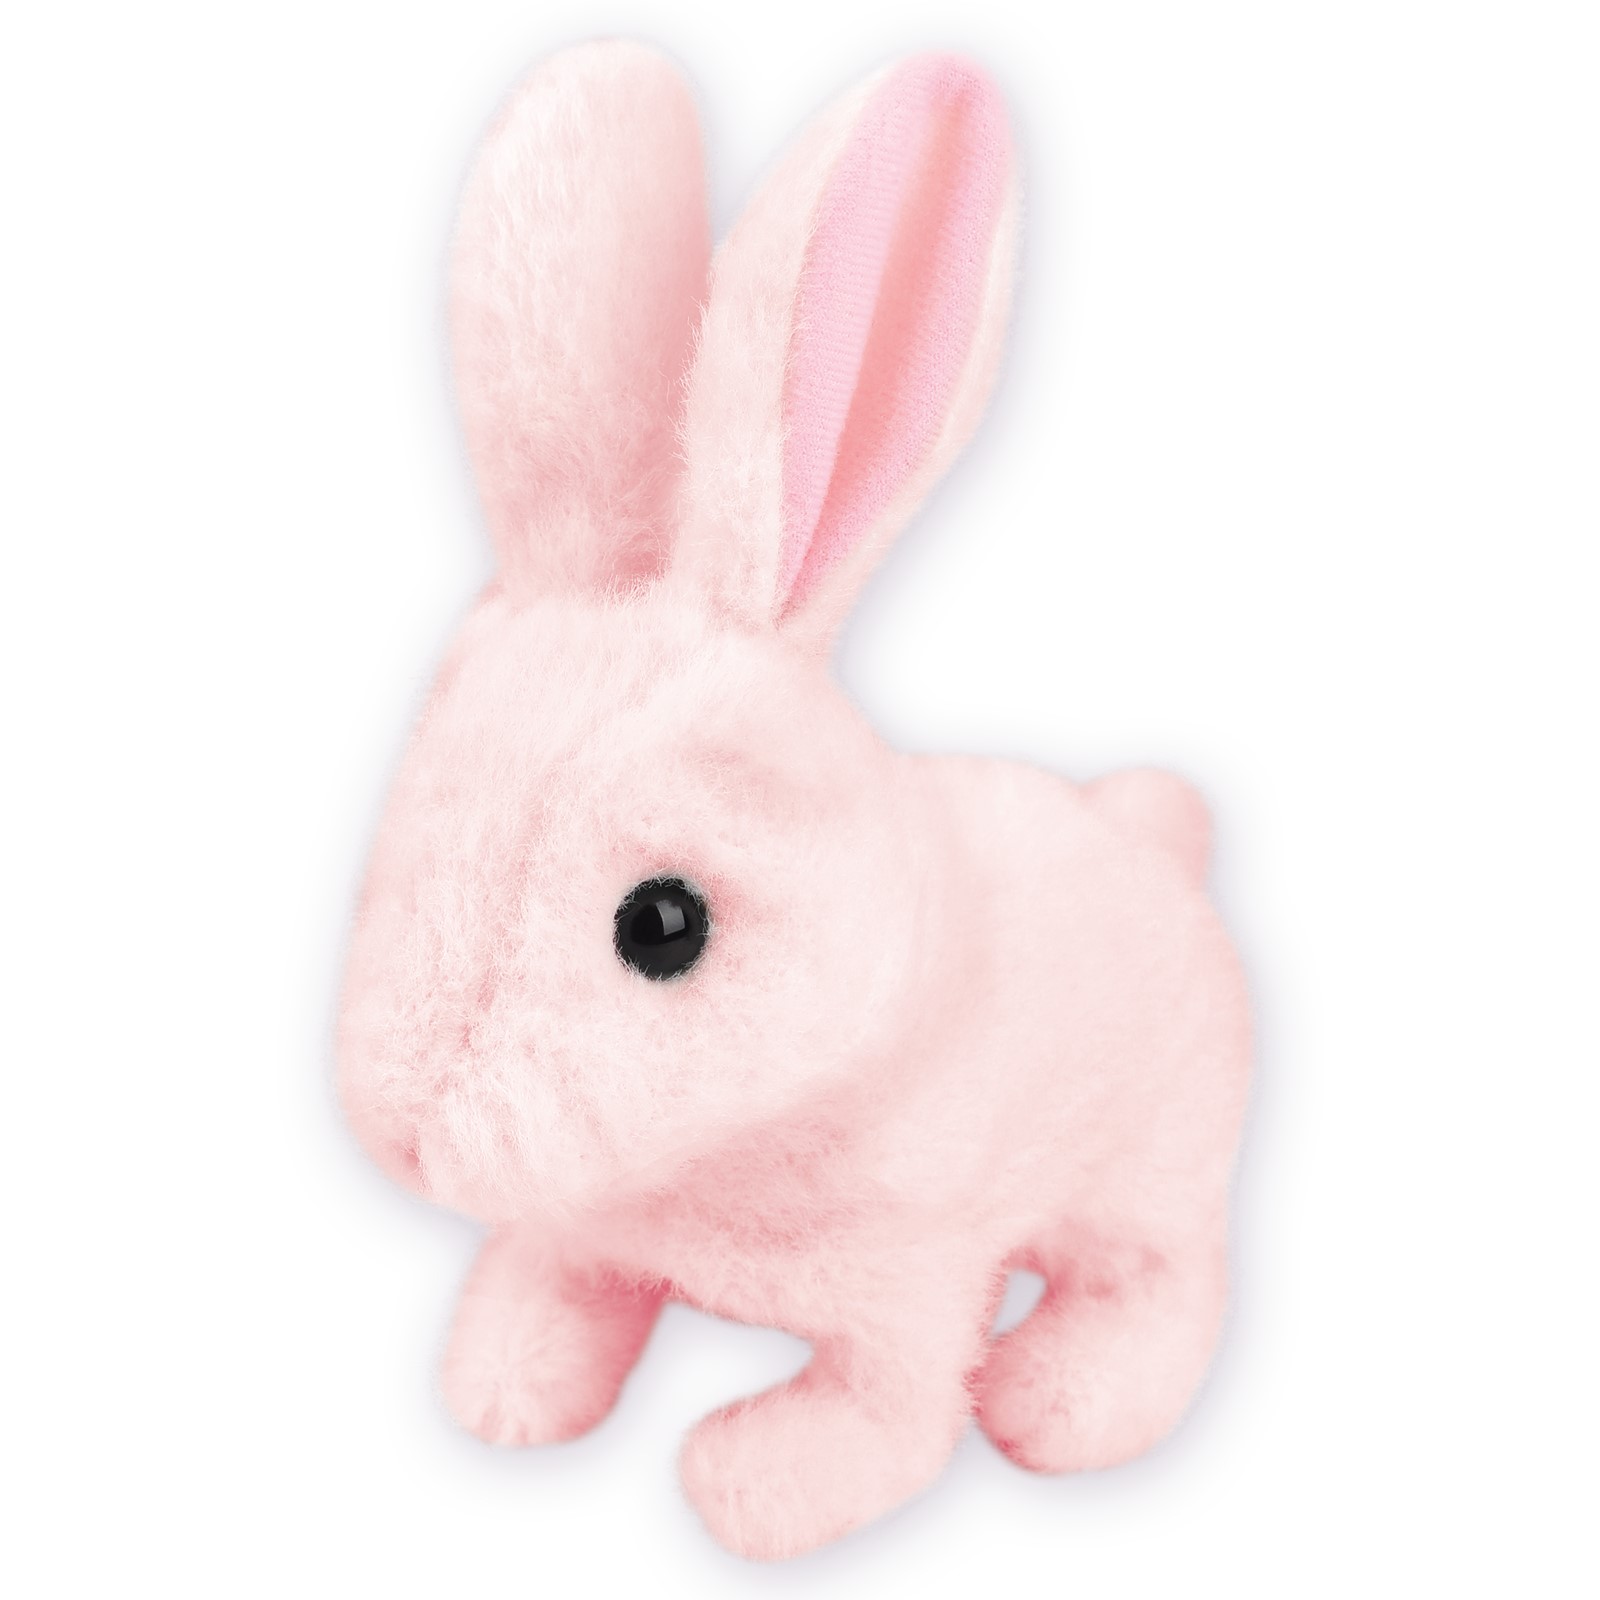 Playful Bunny Hops Around Makes Sounds Wiggles Ears And Nose Cute Interactive Rabbit Kids Soft Cuddly Electronic Pet Battery Toy Animal Great Gift For Preschool Children Boy Girl Toddler Easter (PINK)